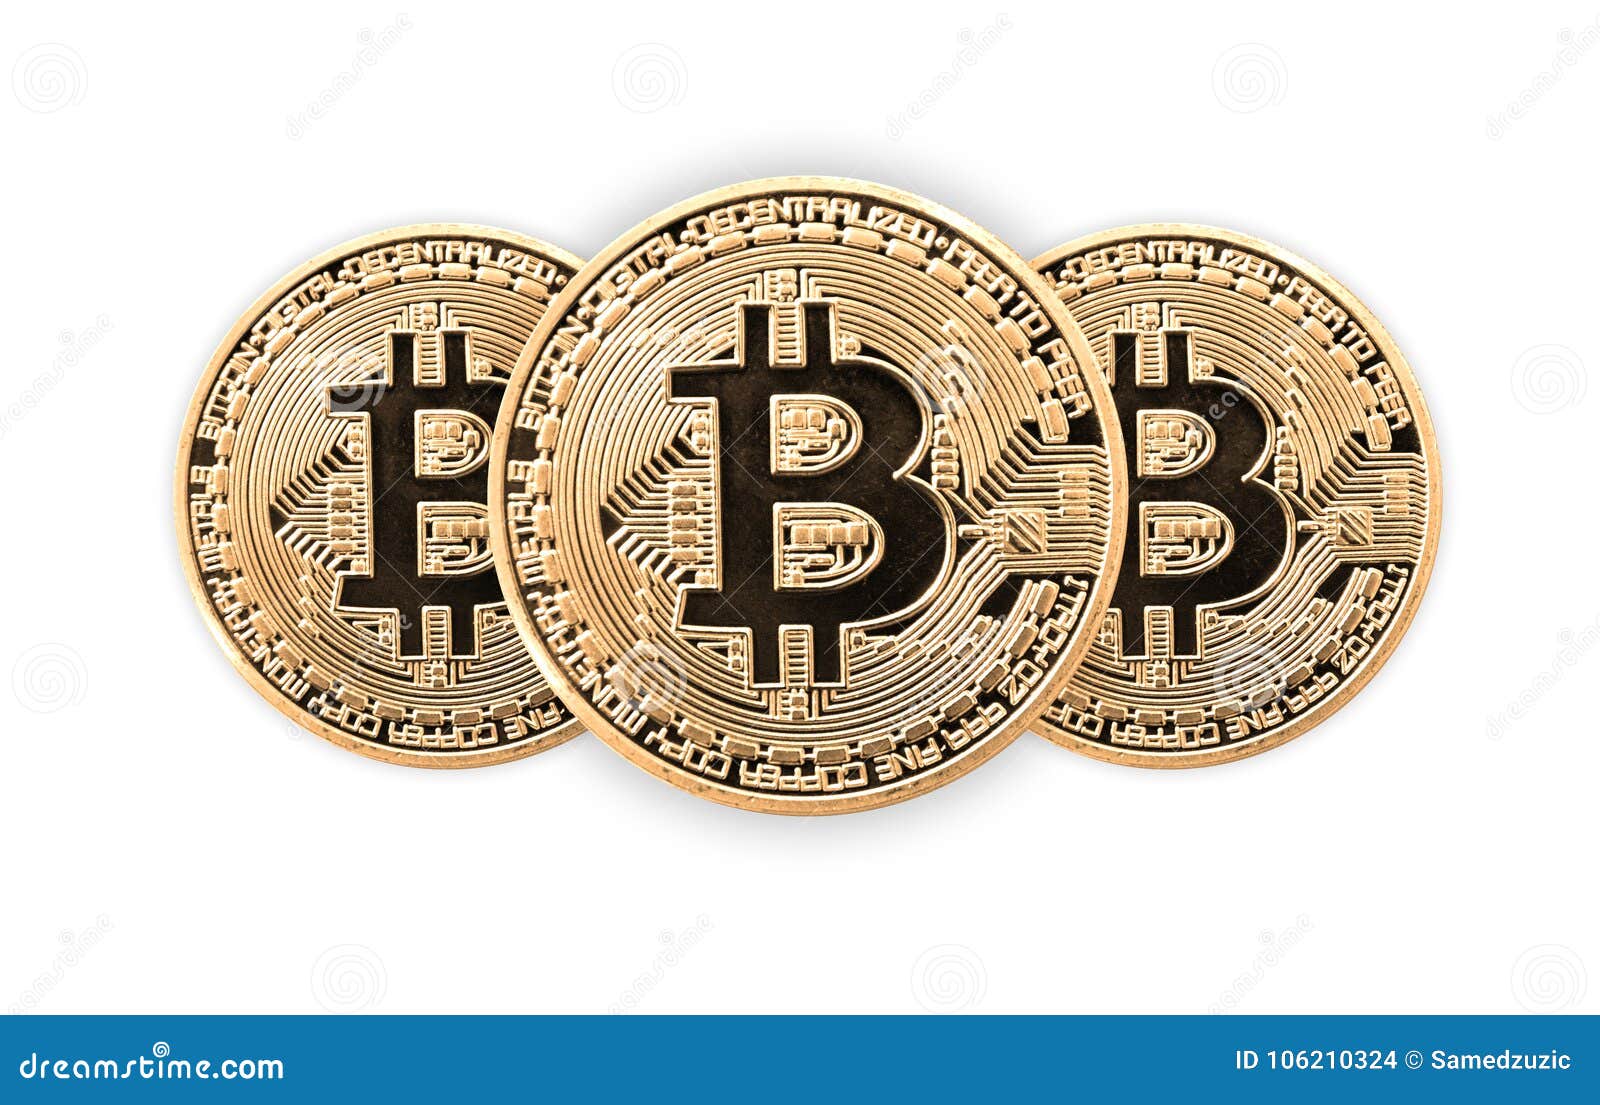 Bitcoin virtual currency editorial stock image. Image of ...